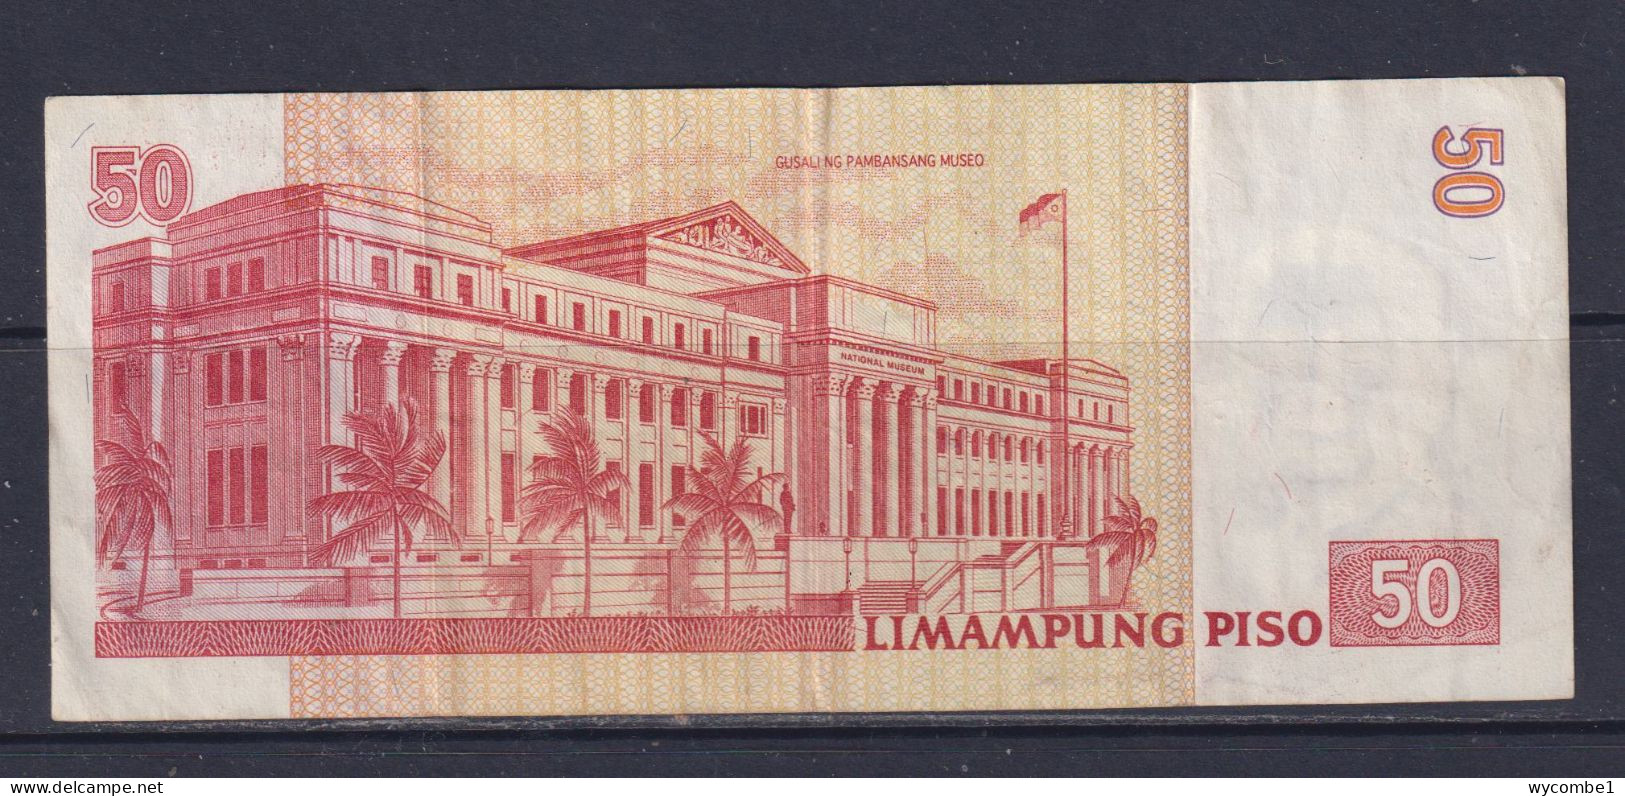 PHILIPPINES - 2003 50 Pesos Circulated Banknote - Philippines